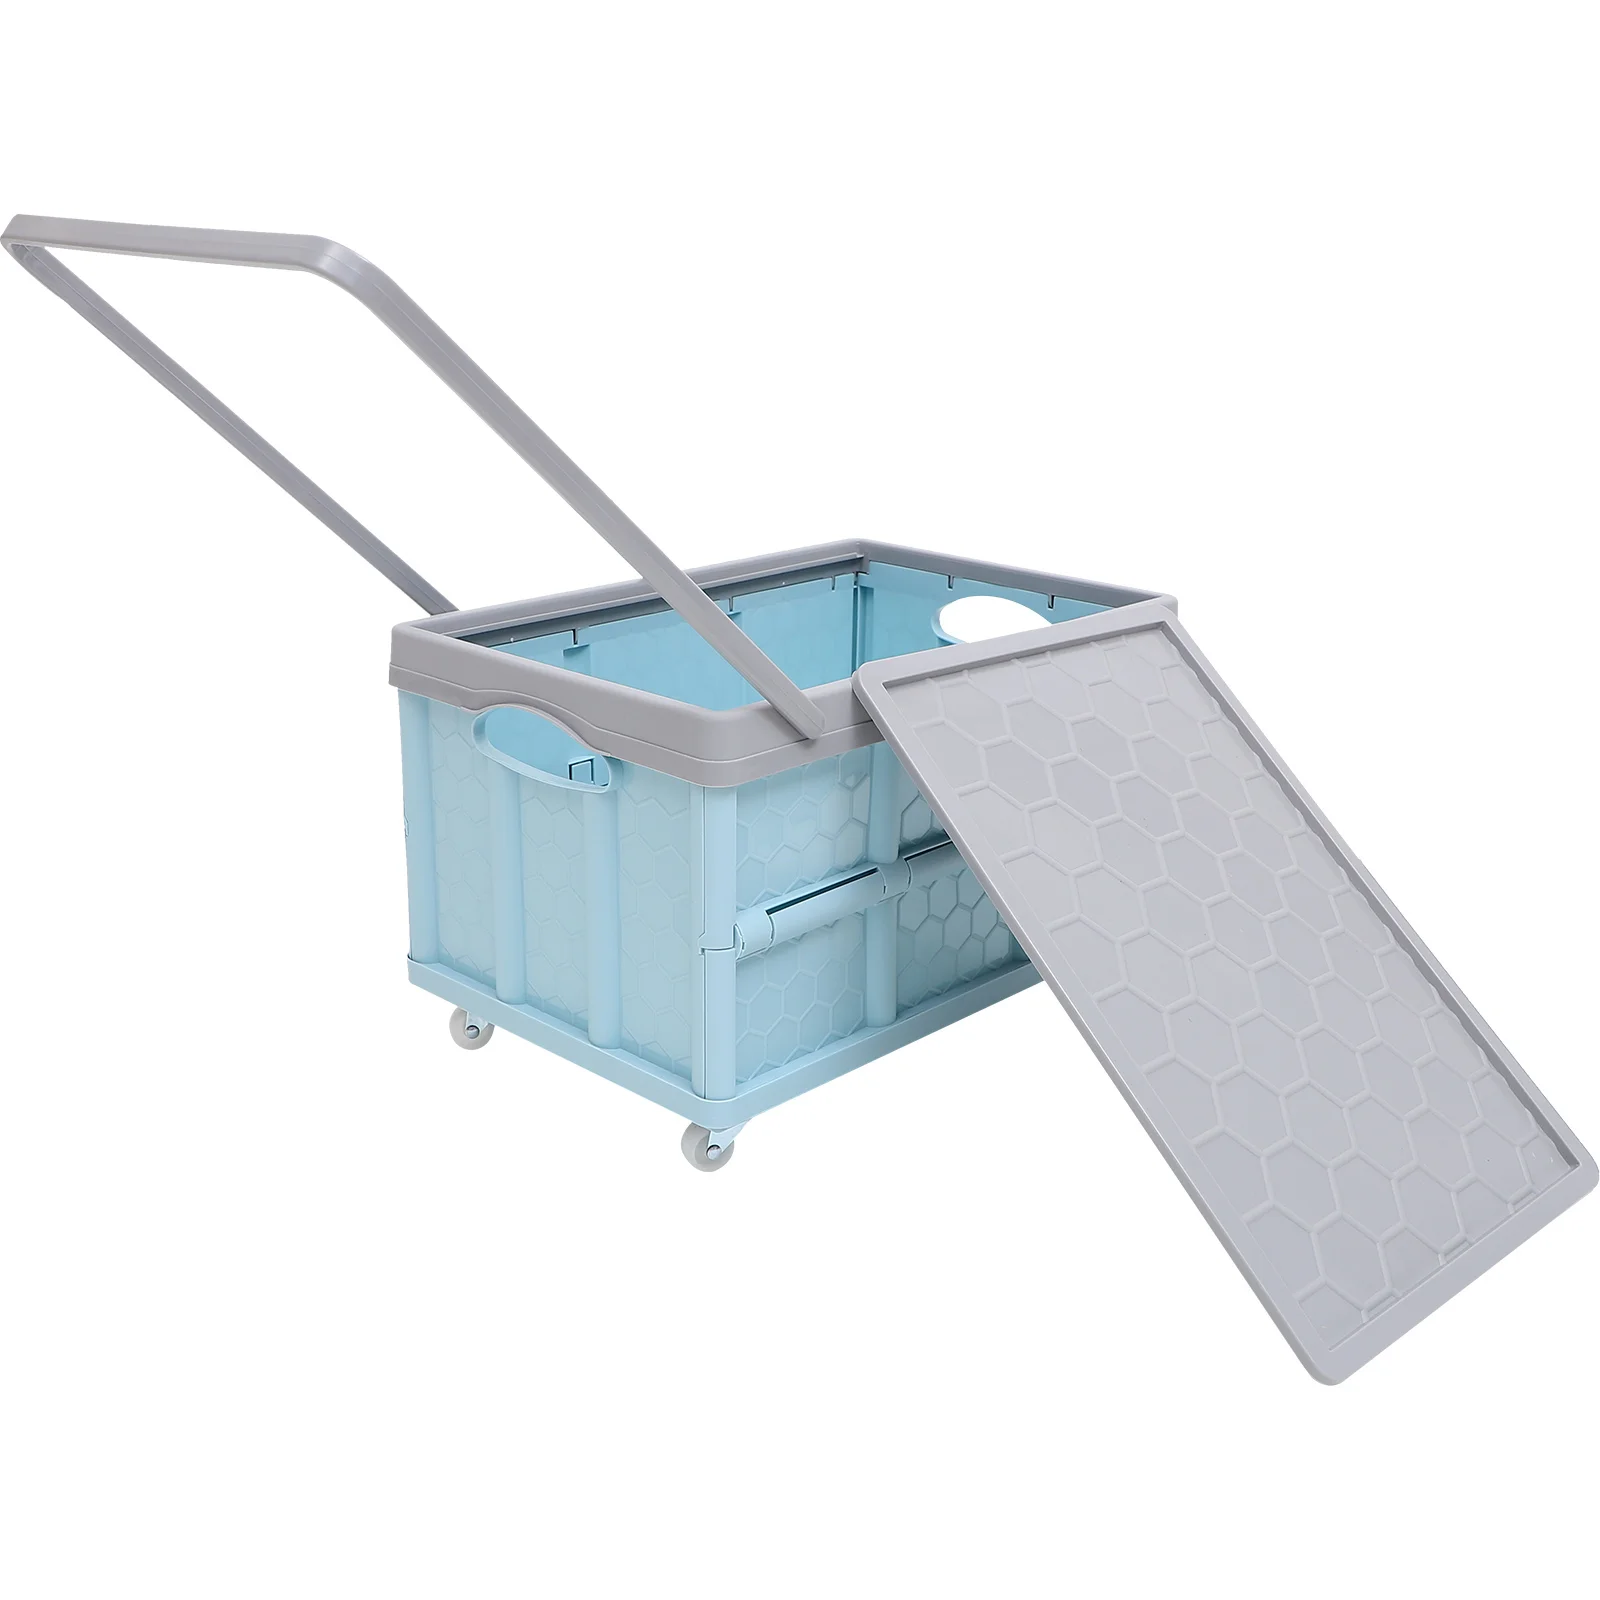 

Collapsible Crate Plastic Crates Storage Camping Containers Pull The Cart Storagem Foldable Bin Shopping Lids Box with wheels